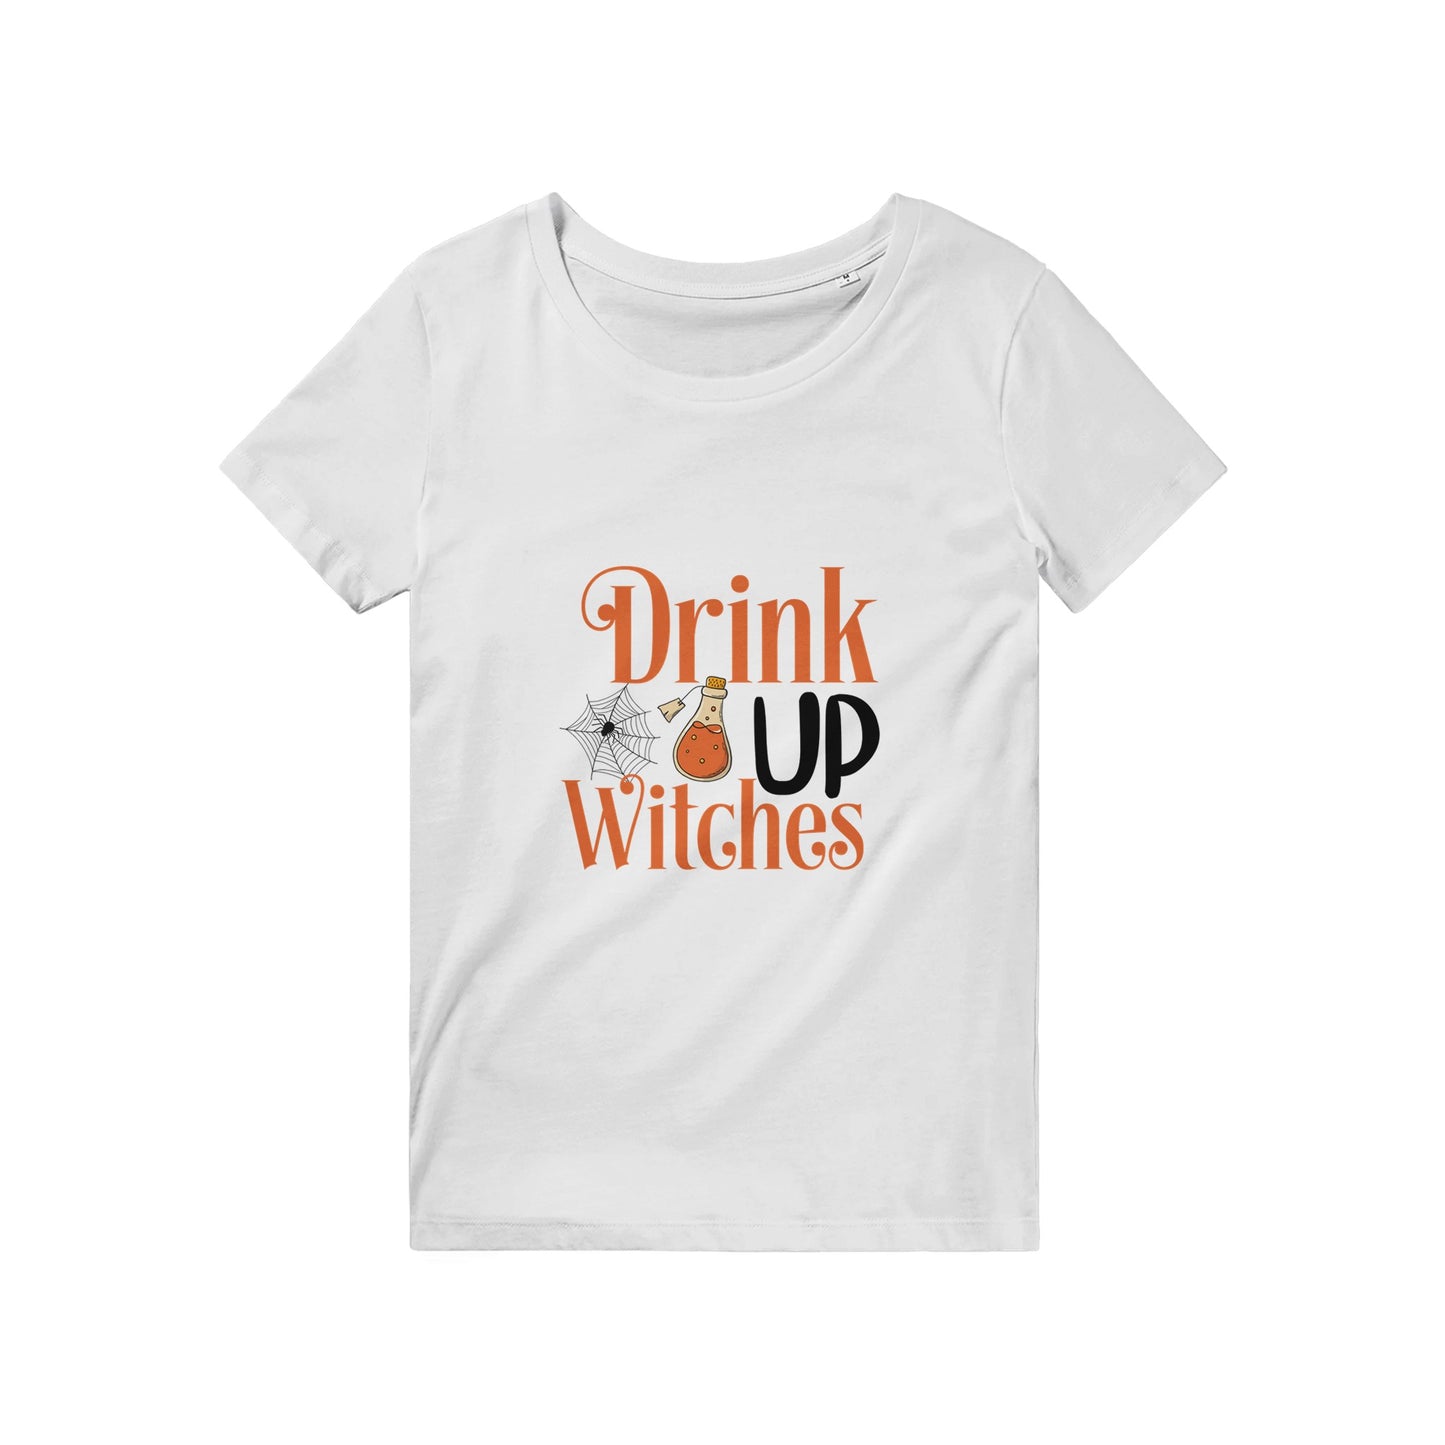 100% Organic Unisex T-shirt/Drink-Up-Witches